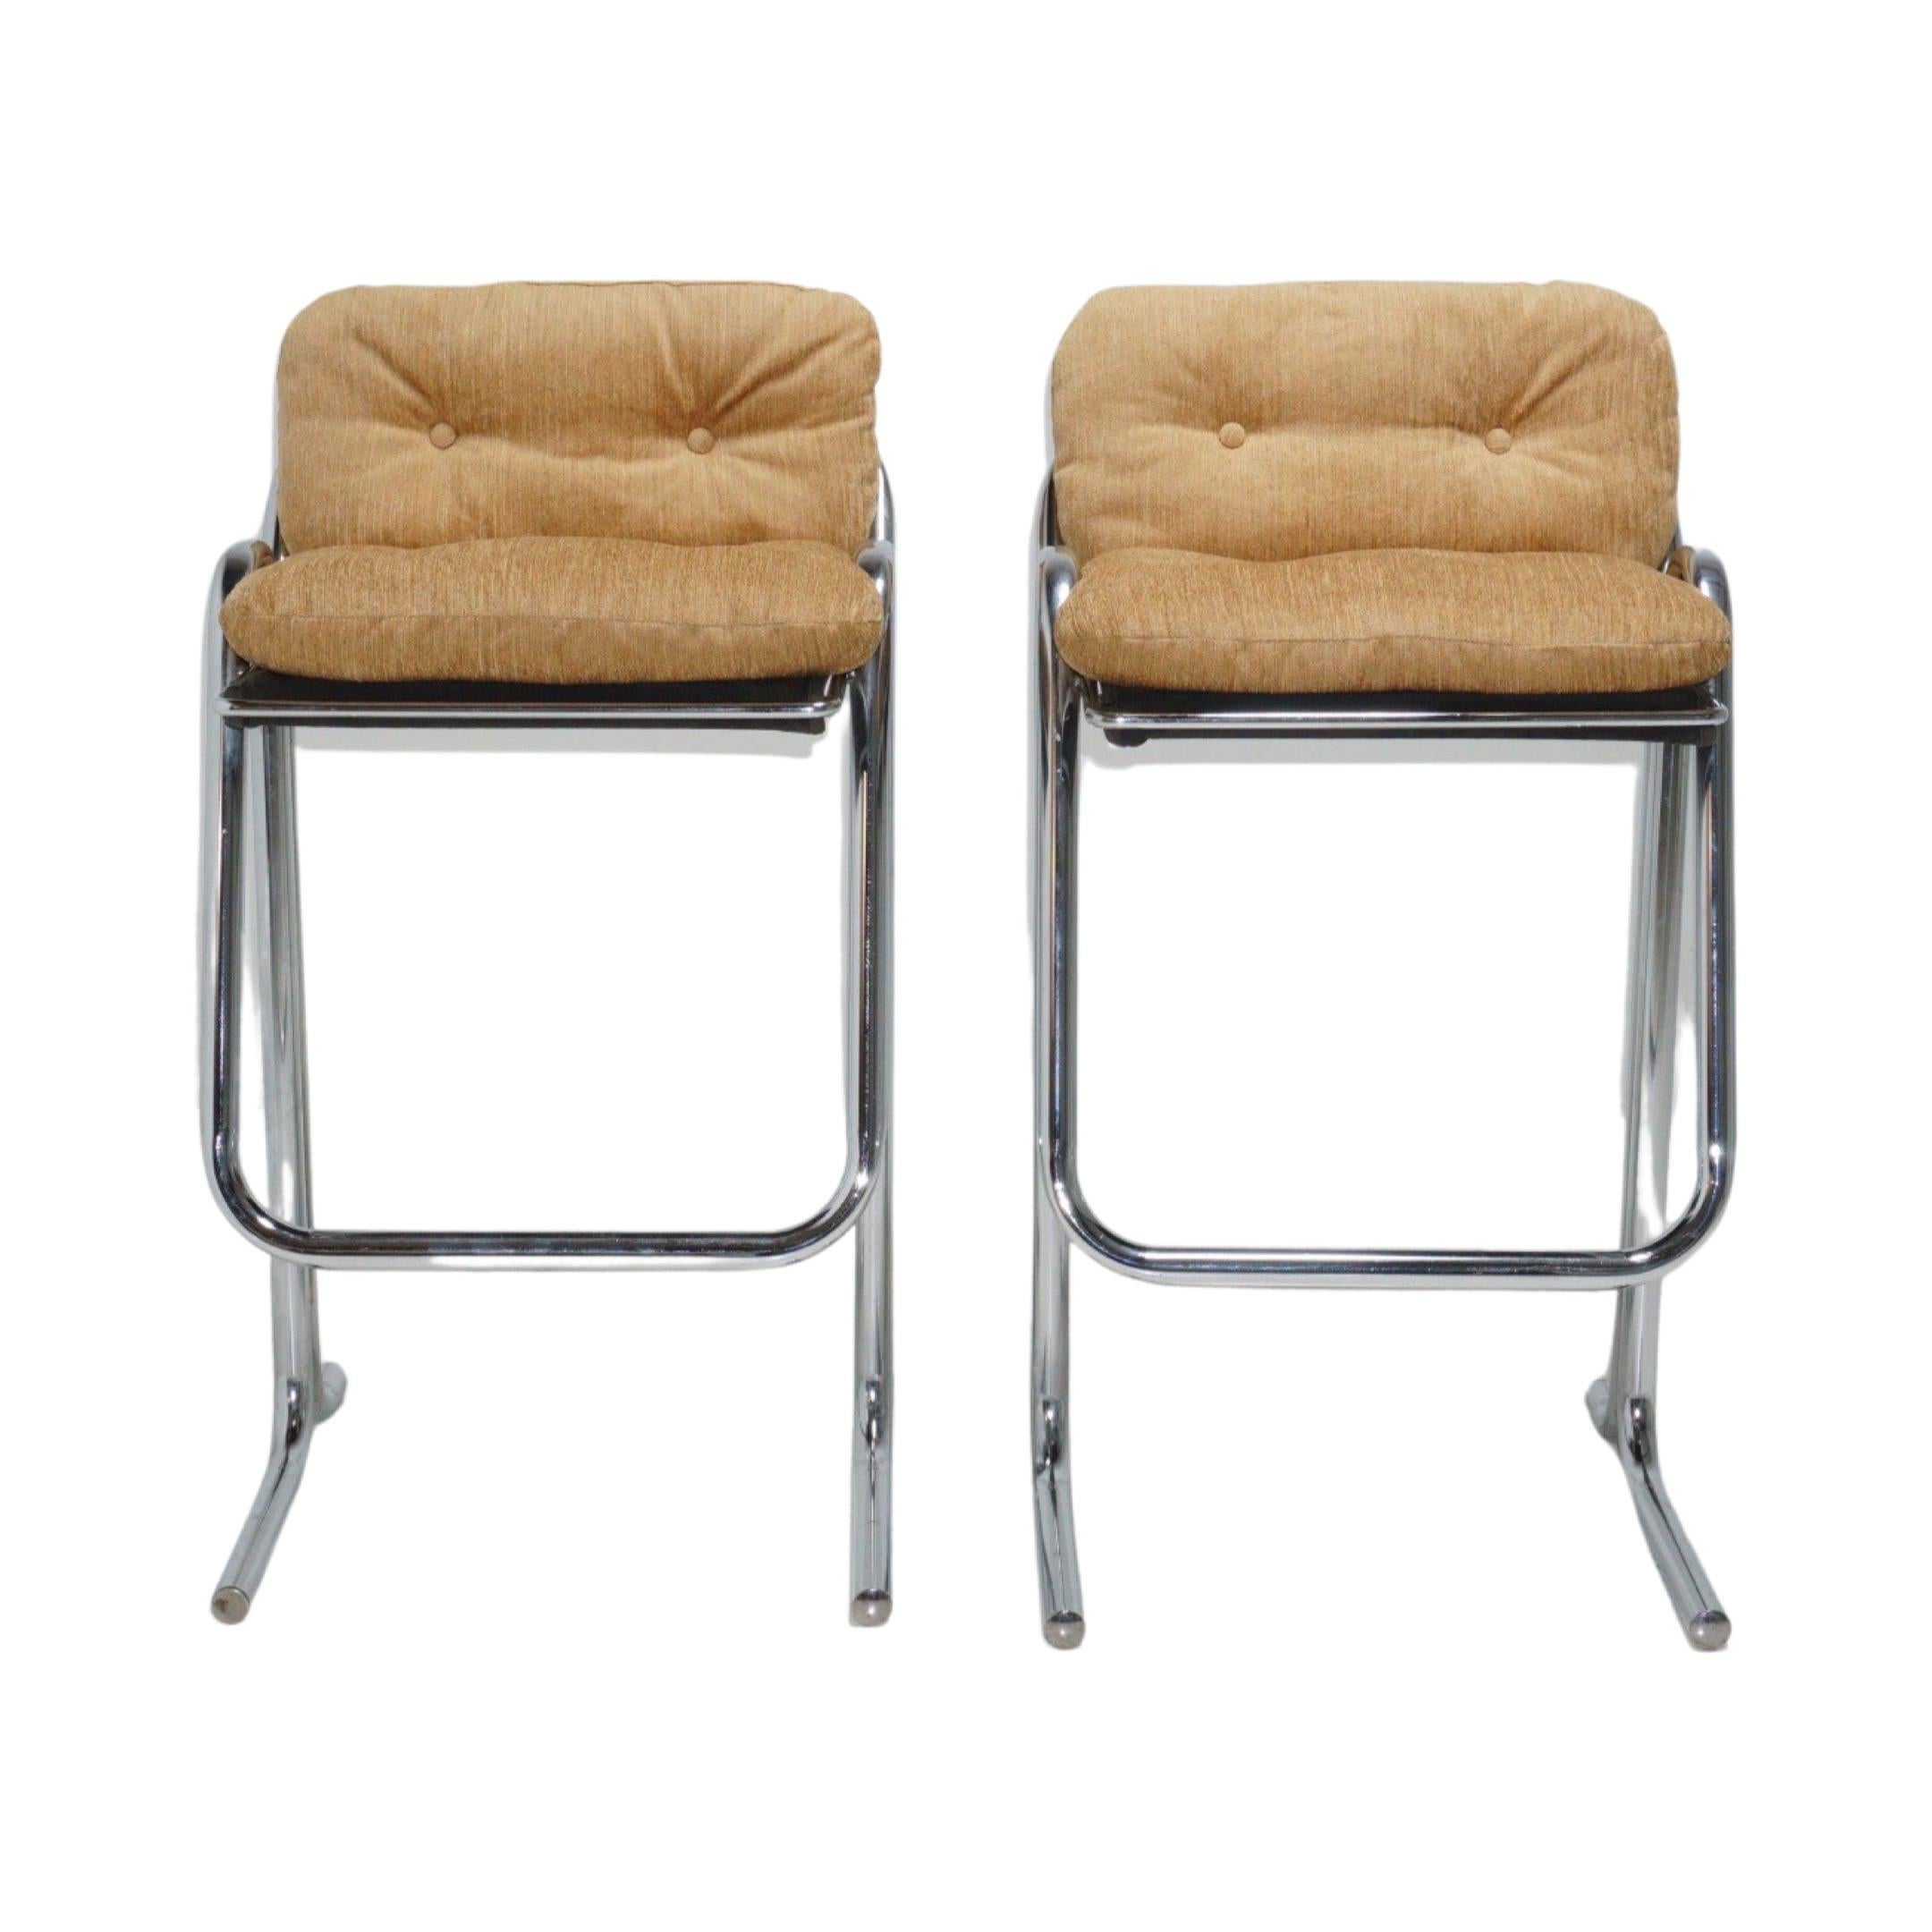 Mid-Century Modern Pair of Barstools by Jerry Johnson, 1970s For Sale